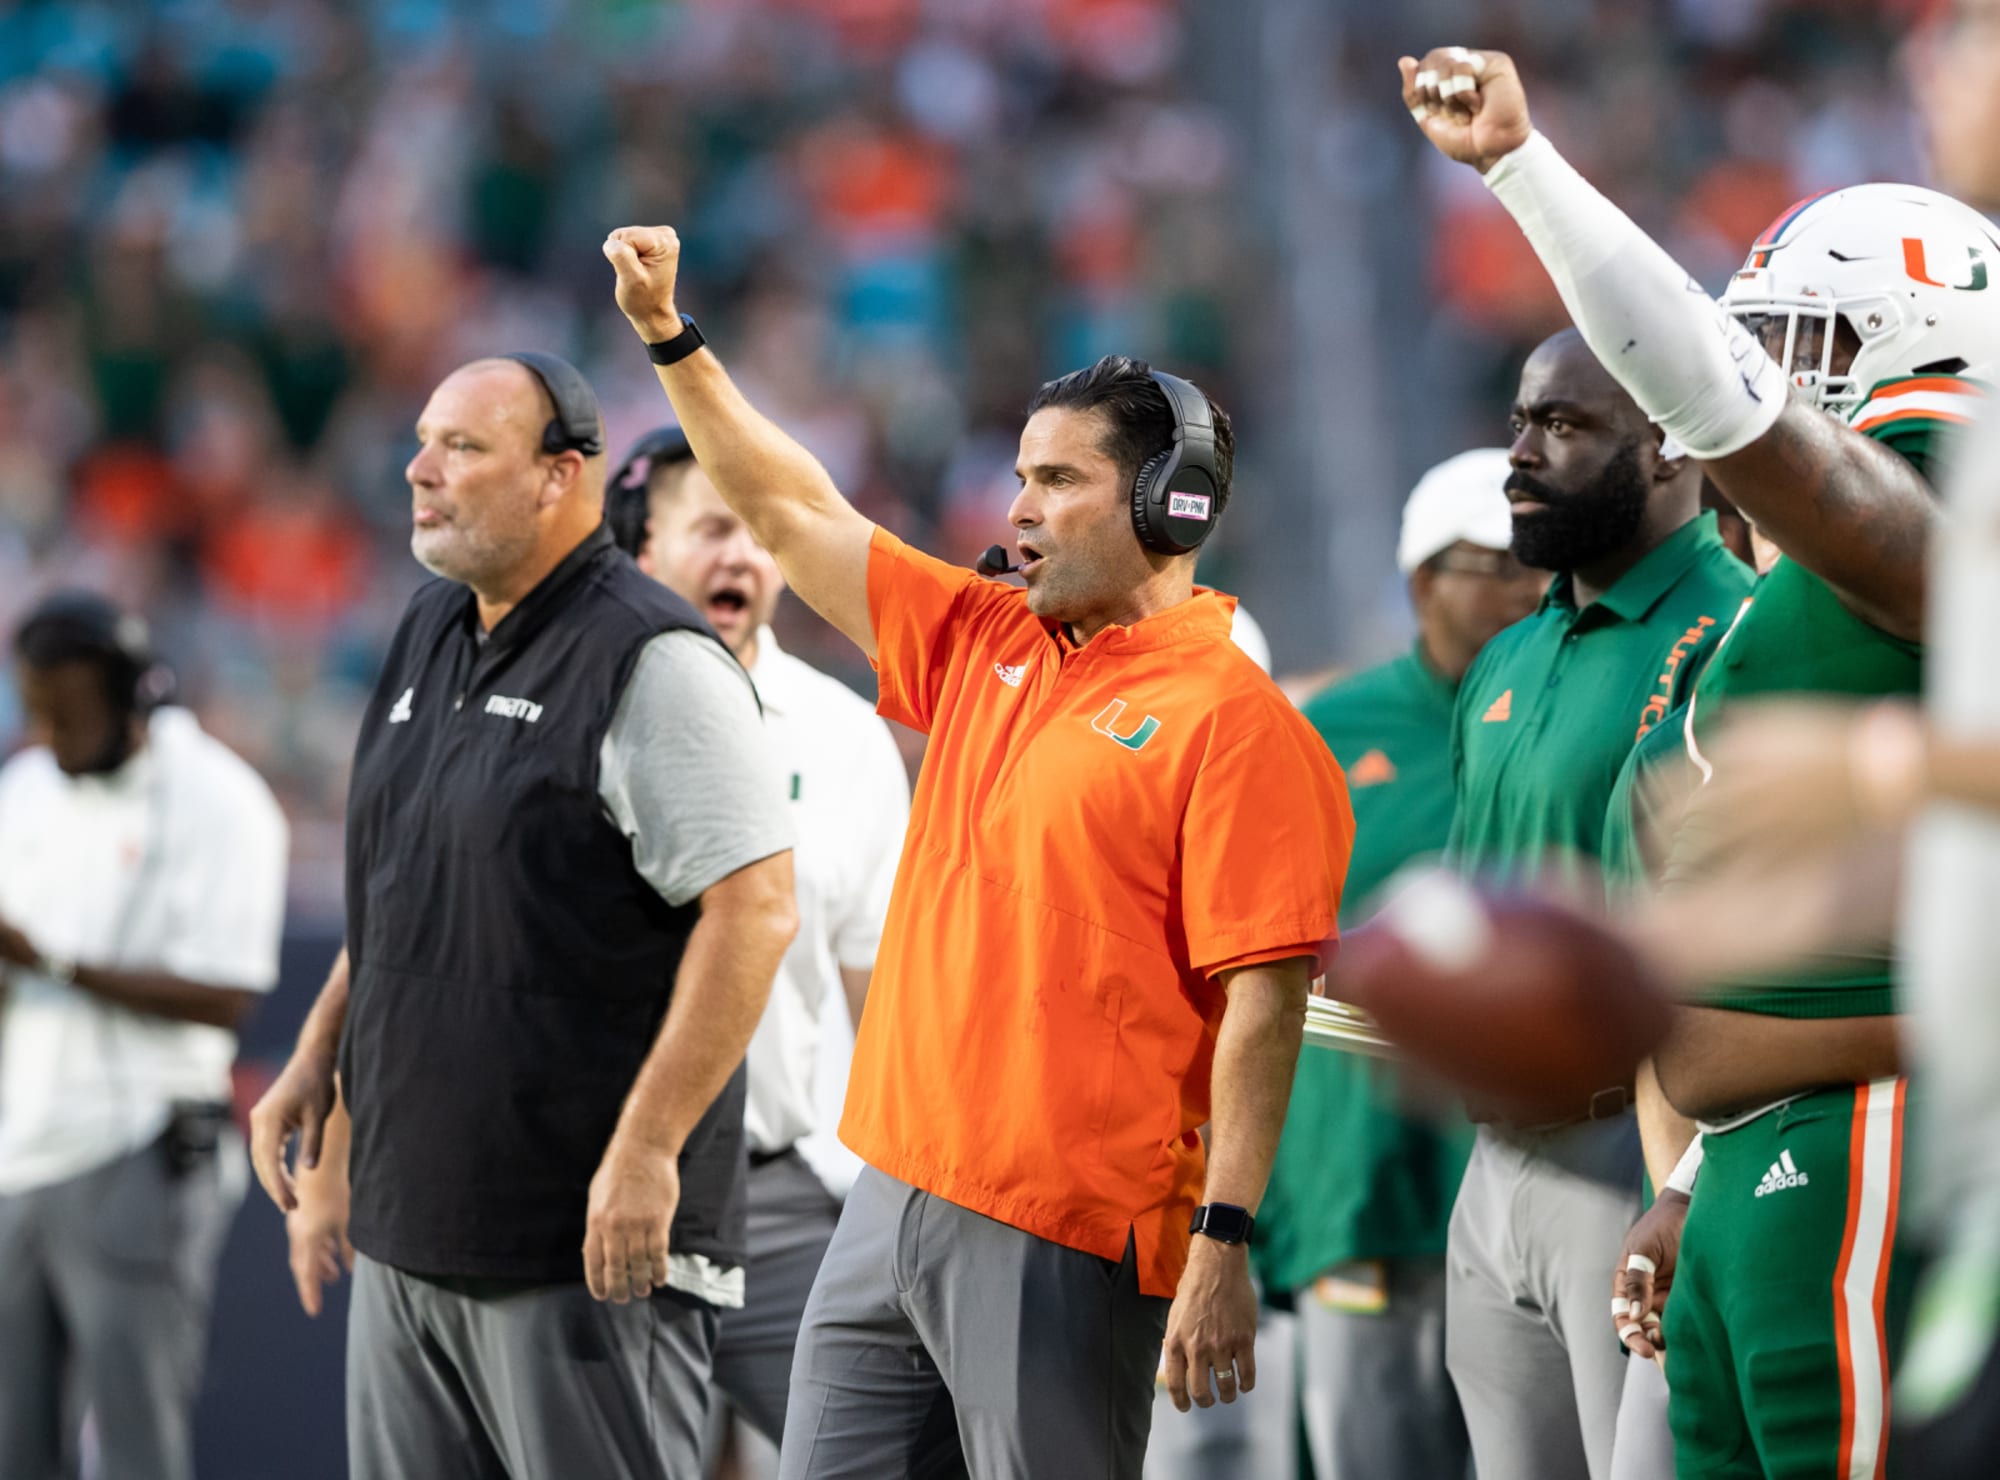 Manny Diaz praises Miami Football resources and campus changes